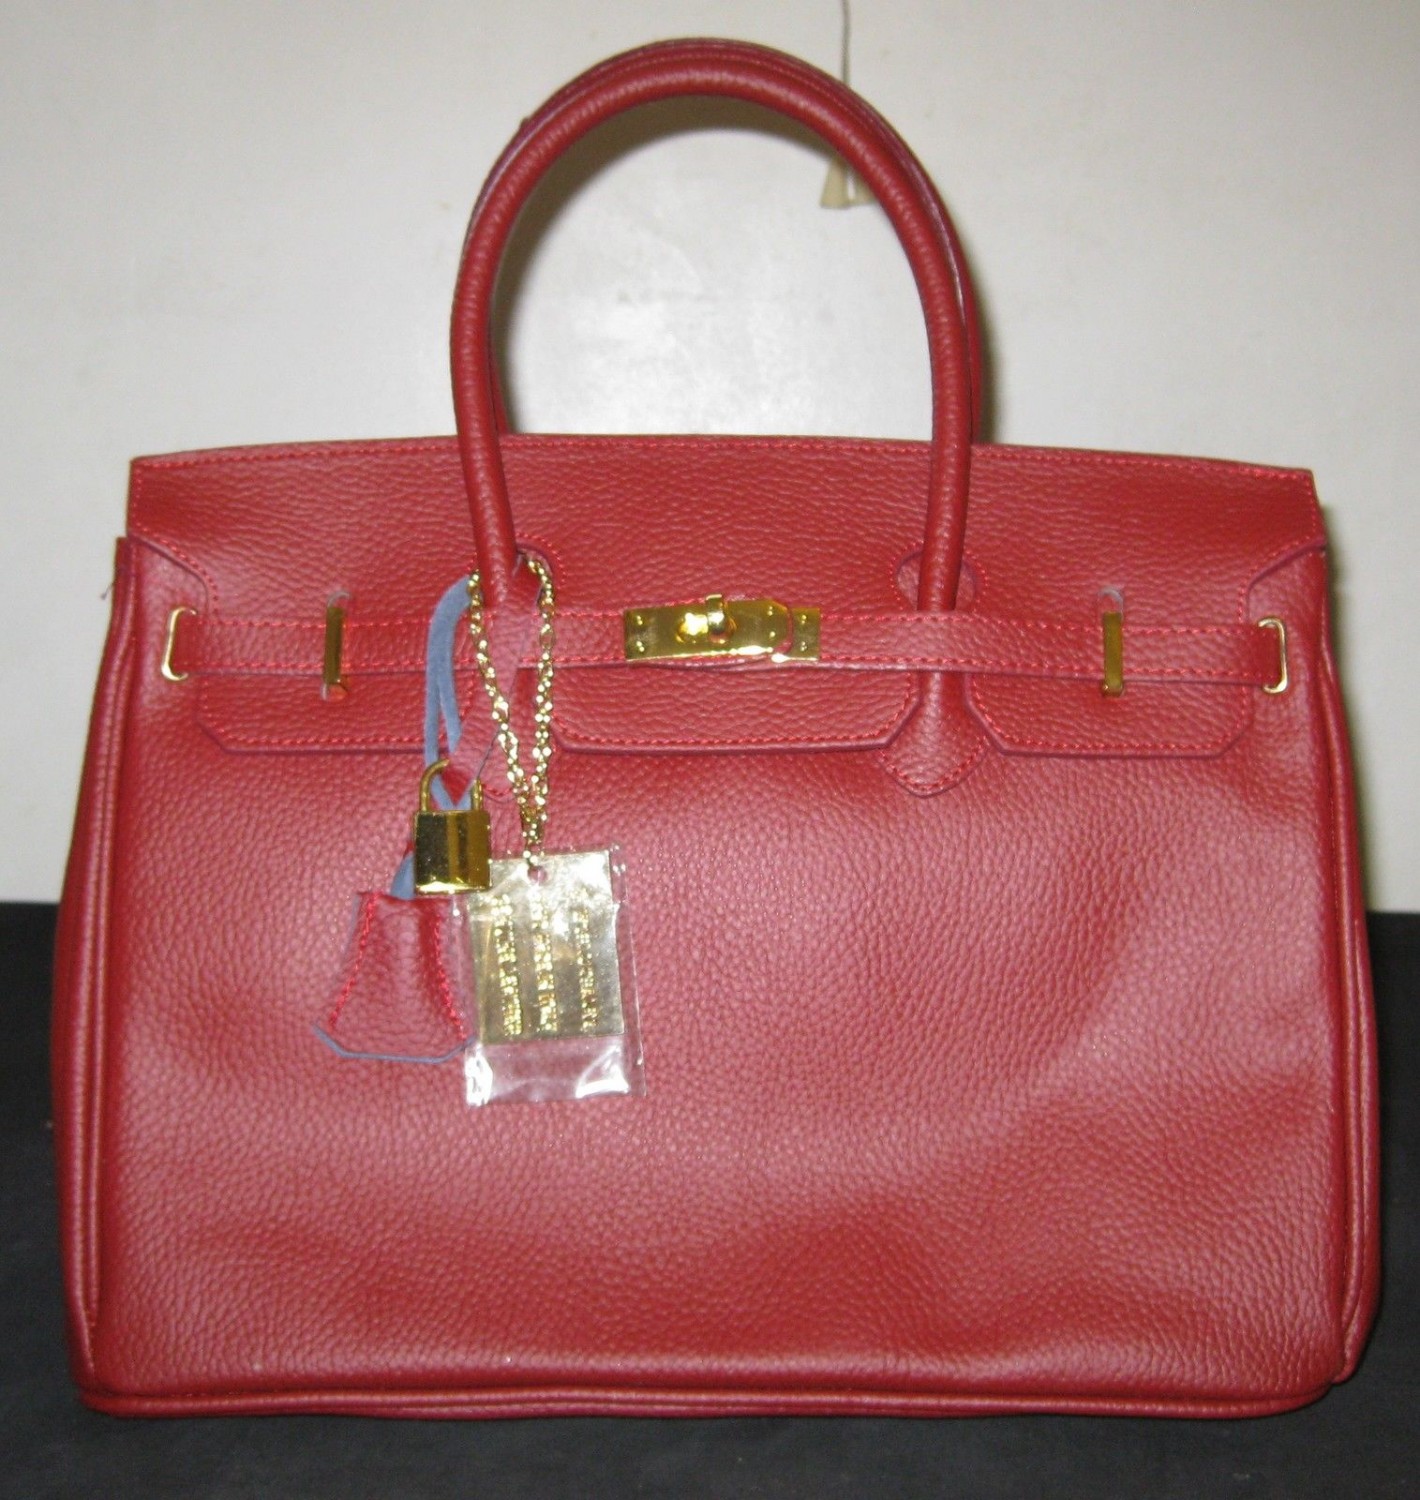 100% Italy Leather Hand Bag - Red Colors.